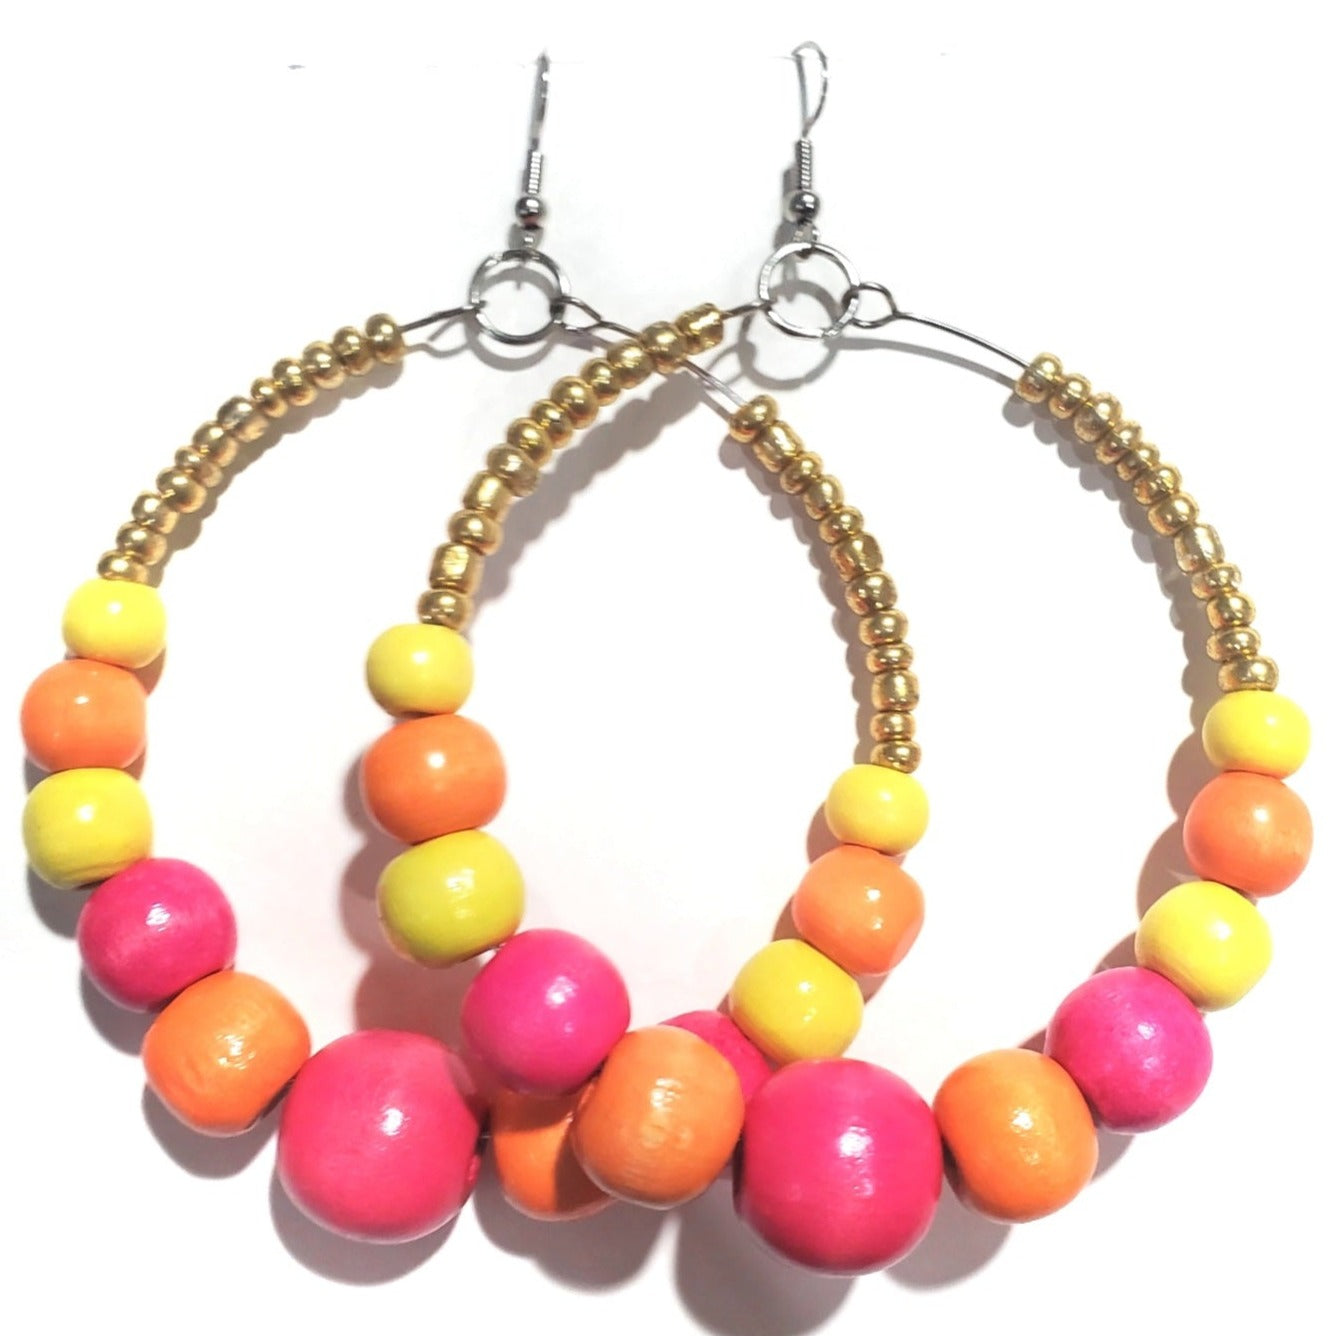 Pink, Orange, and Yellow Wood Bead Earrings designed by creator Unique Carper – Cute, chic, and fabulous earrings that are bright enough to attract all the attention when you step into any room